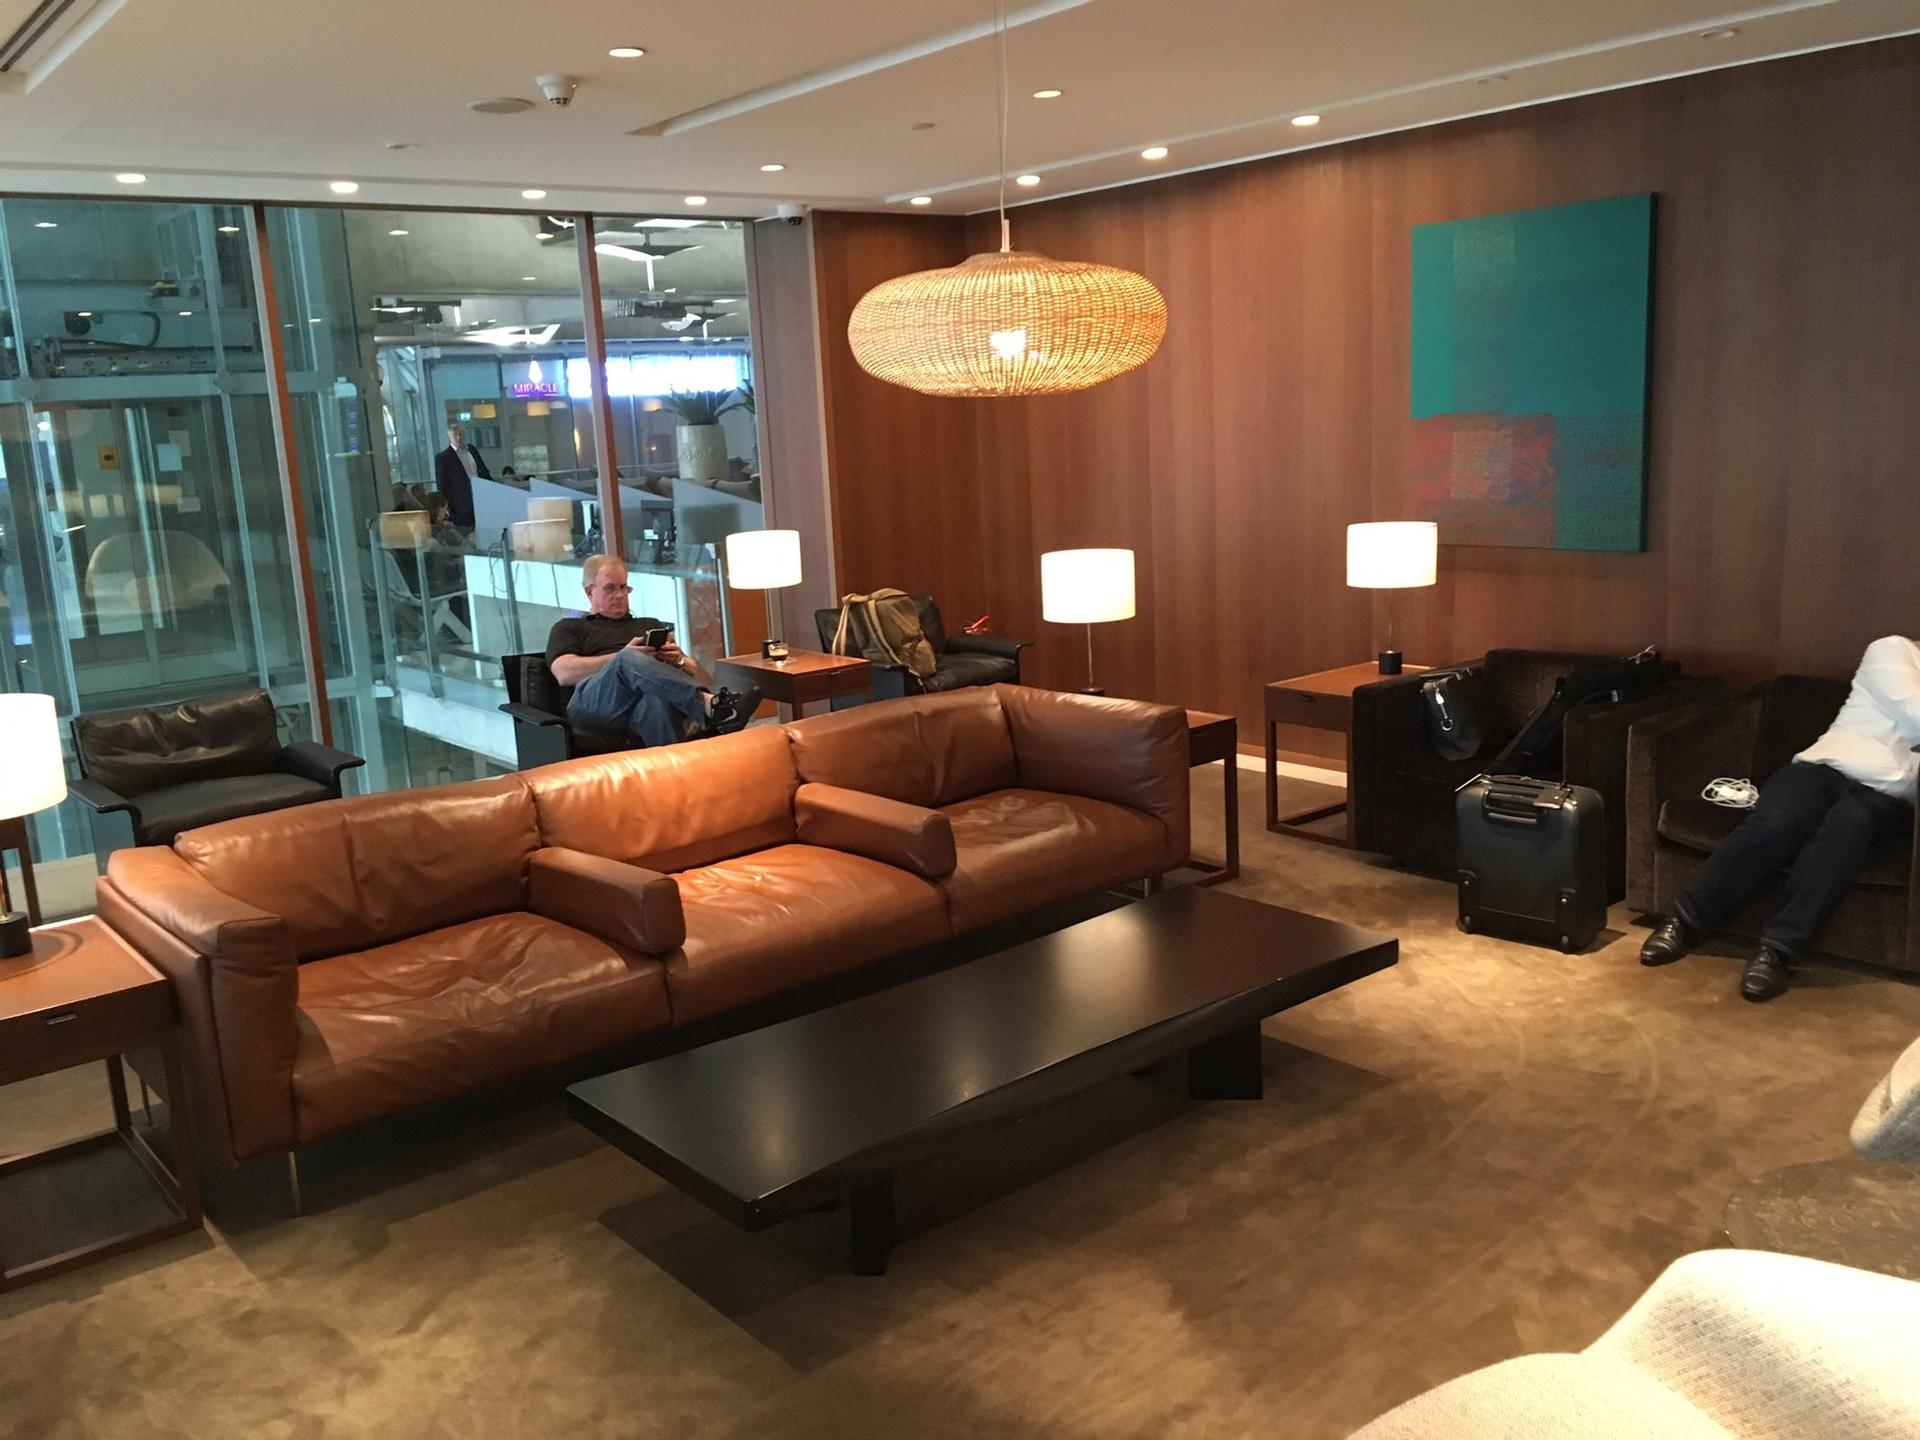 Cathay Pacific First and Business Class Lounge image 64 of 69